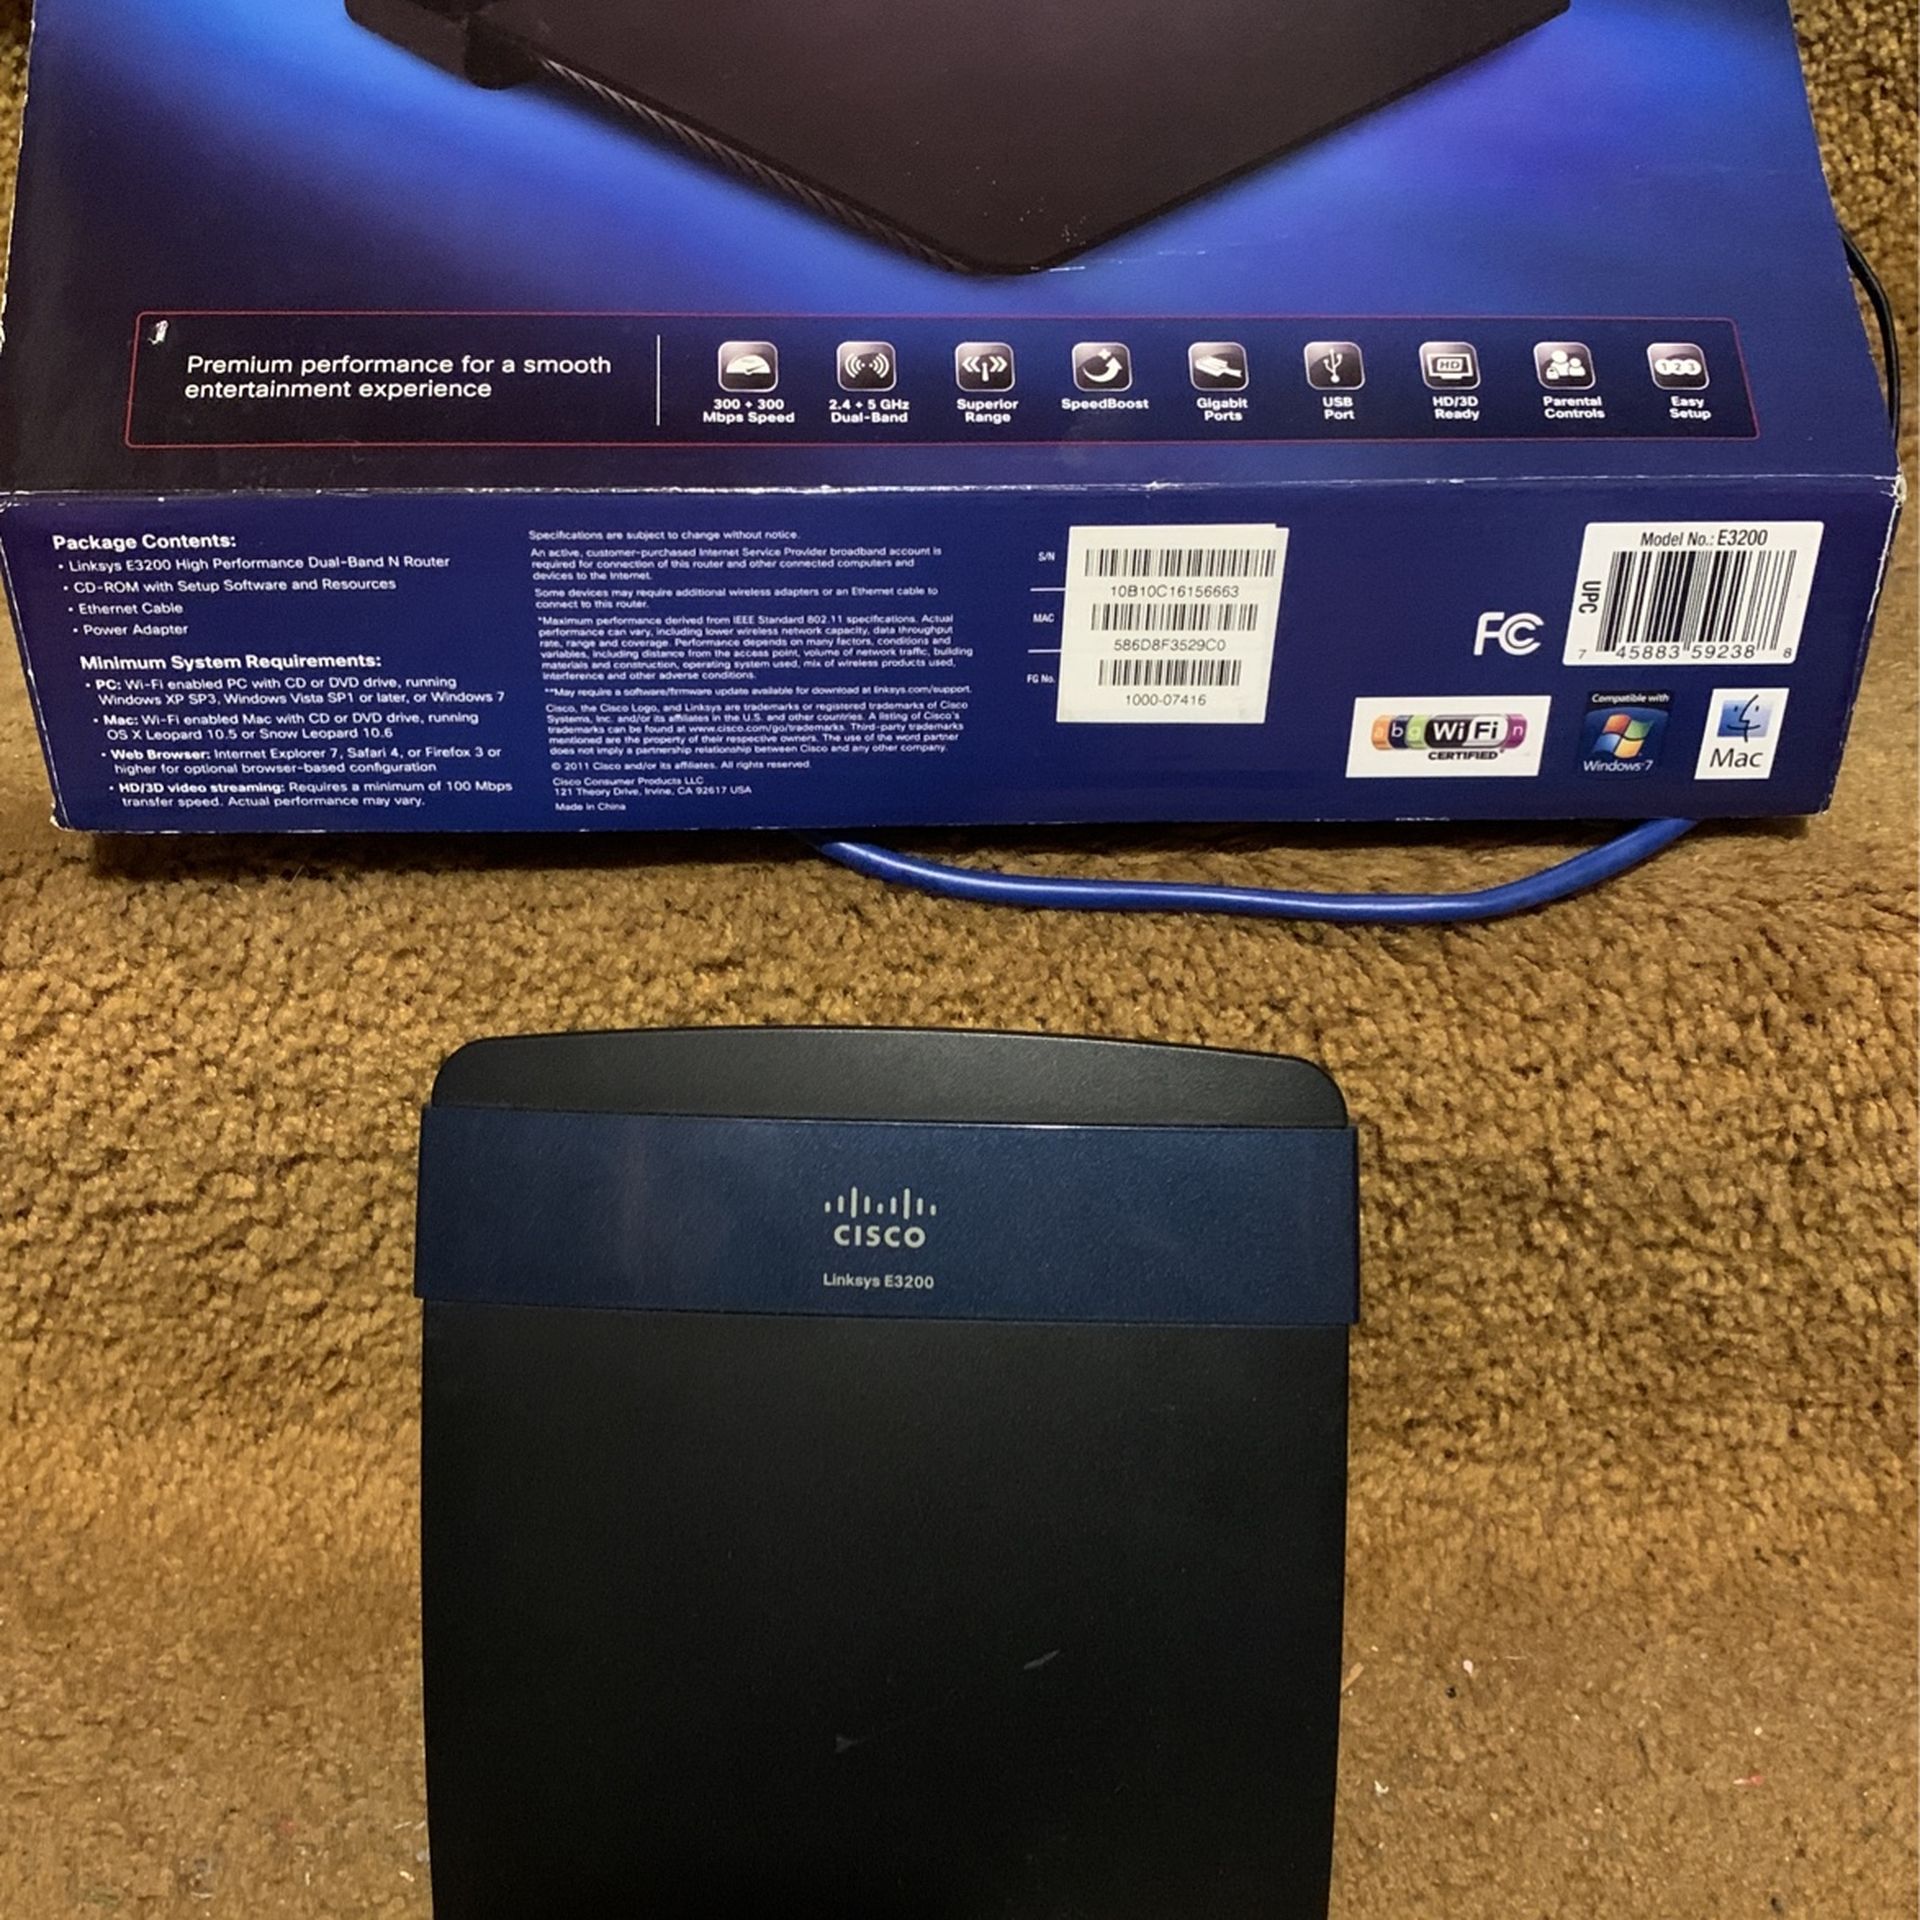 Linksys E3200 HiPerformance Dual Band N Router